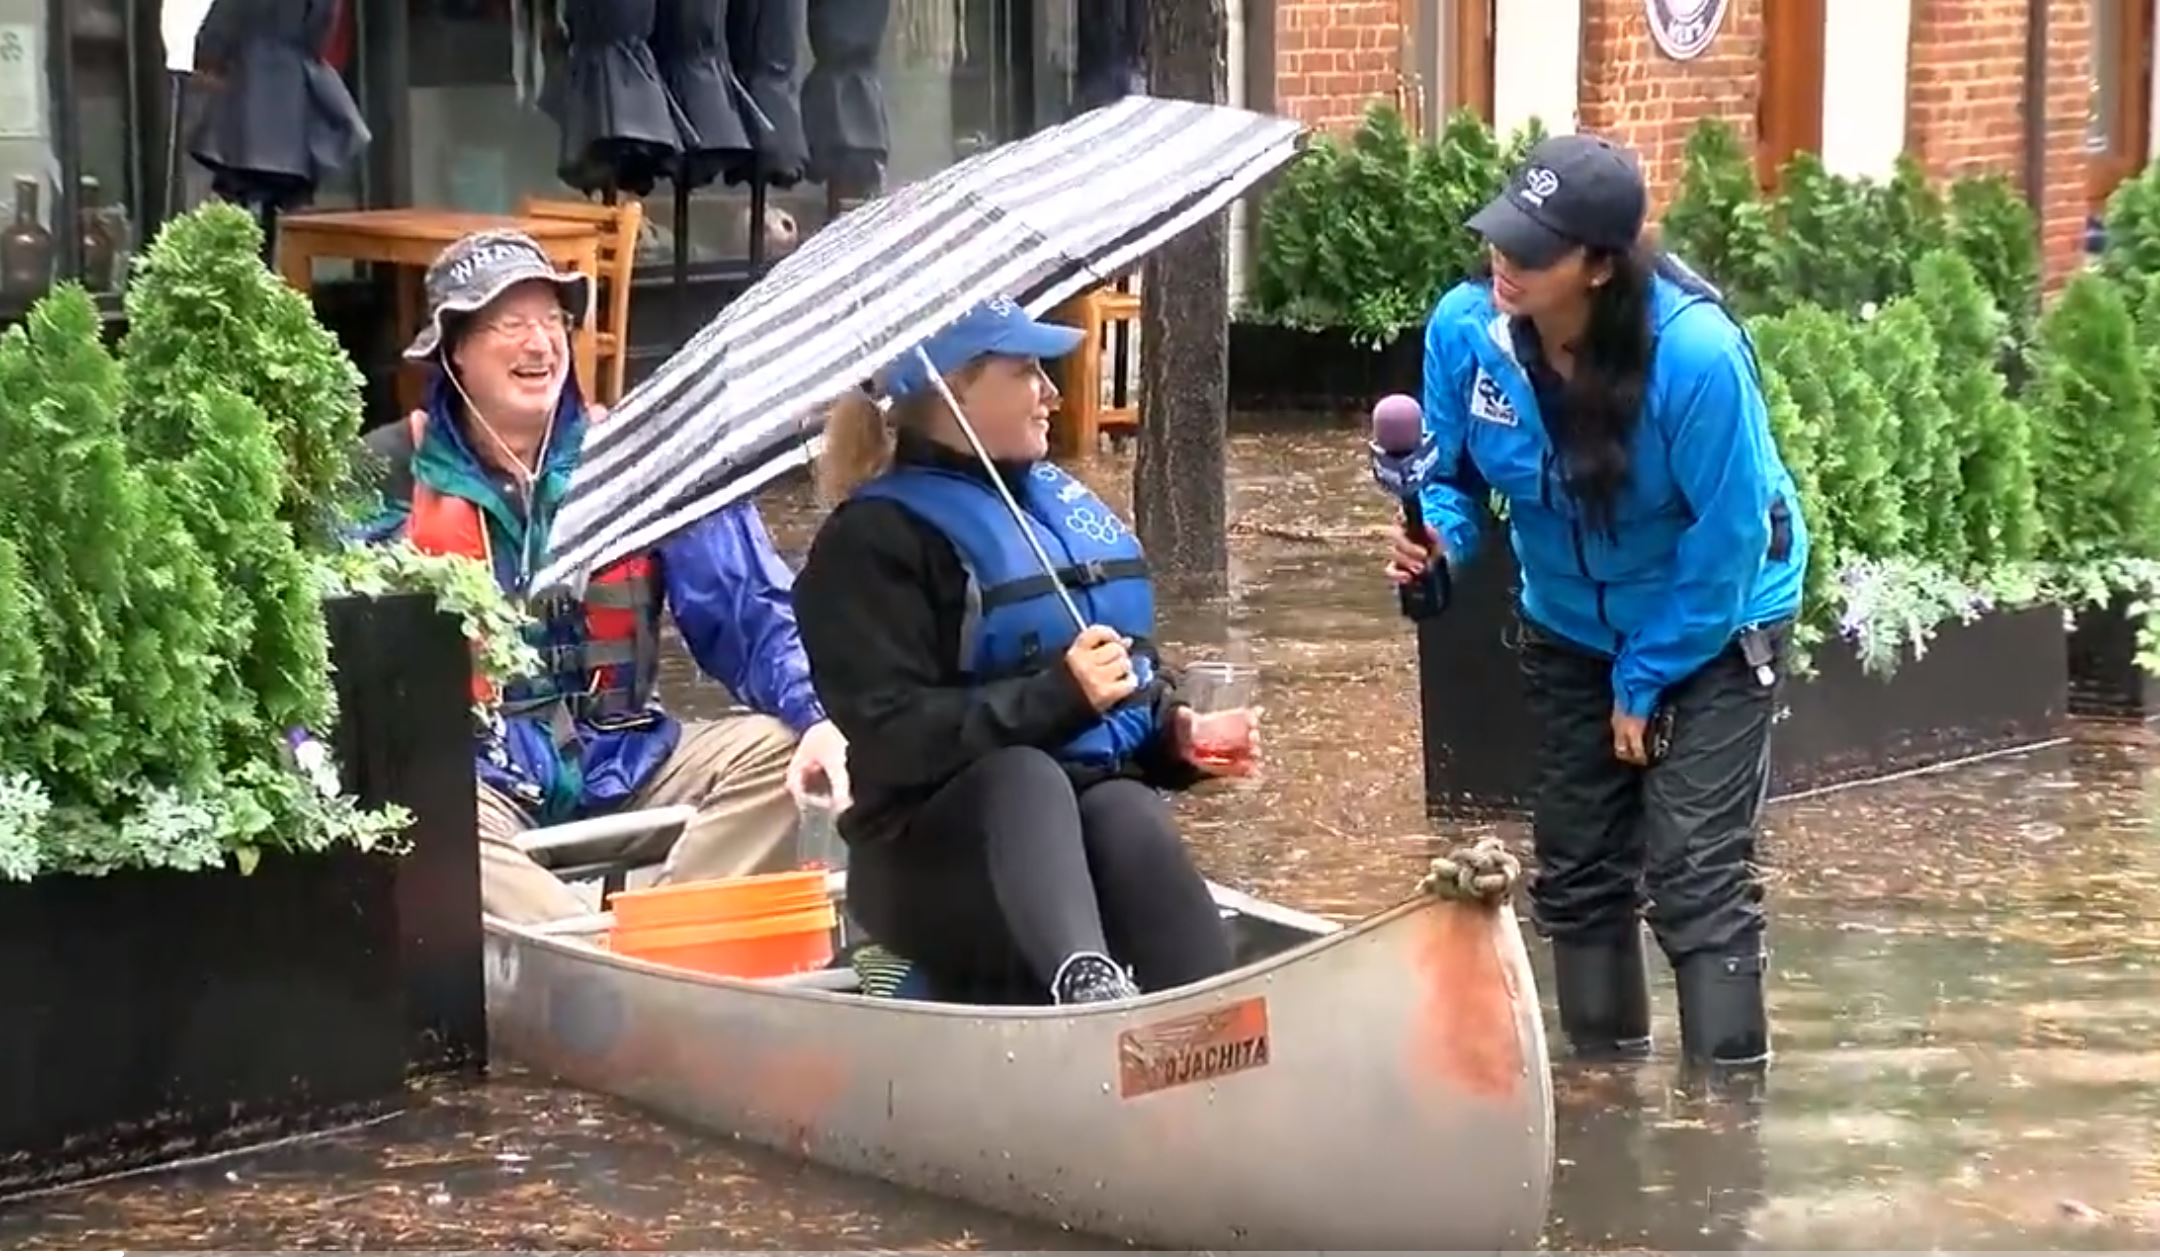 Local news reporter for Channel 7, Victoria Sanchez, interviews canoing couple during October 29, 2021 flood in Old Town Alexandria. (Courtesy photo)